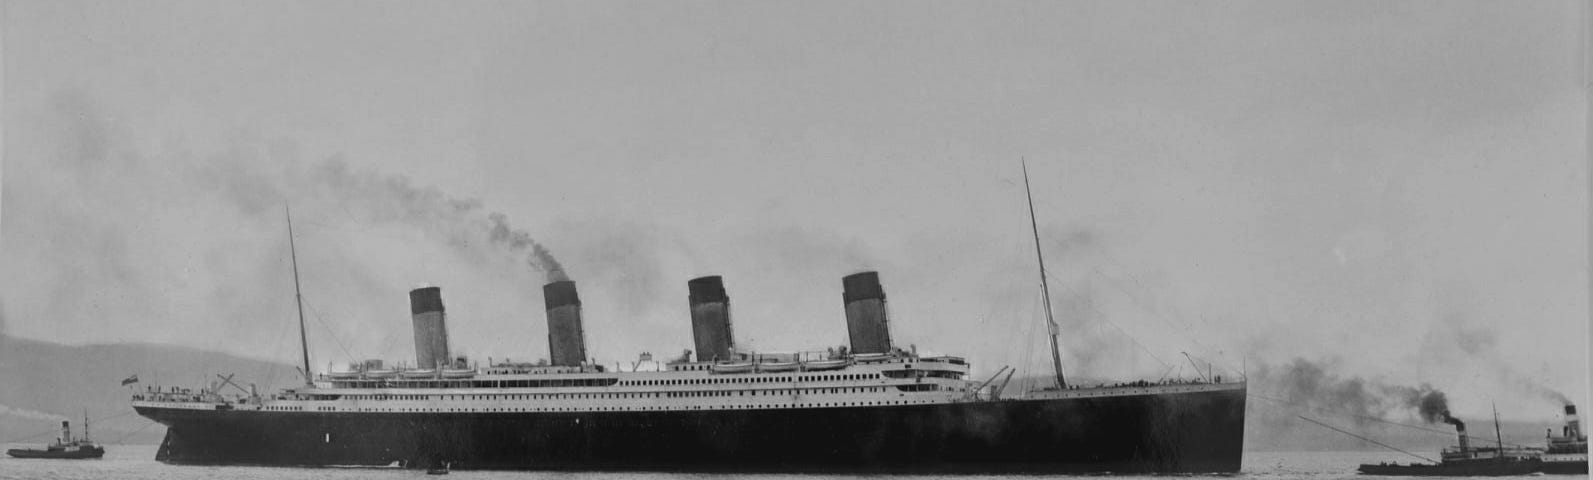 Titanic on her sea trials, early April, 1912